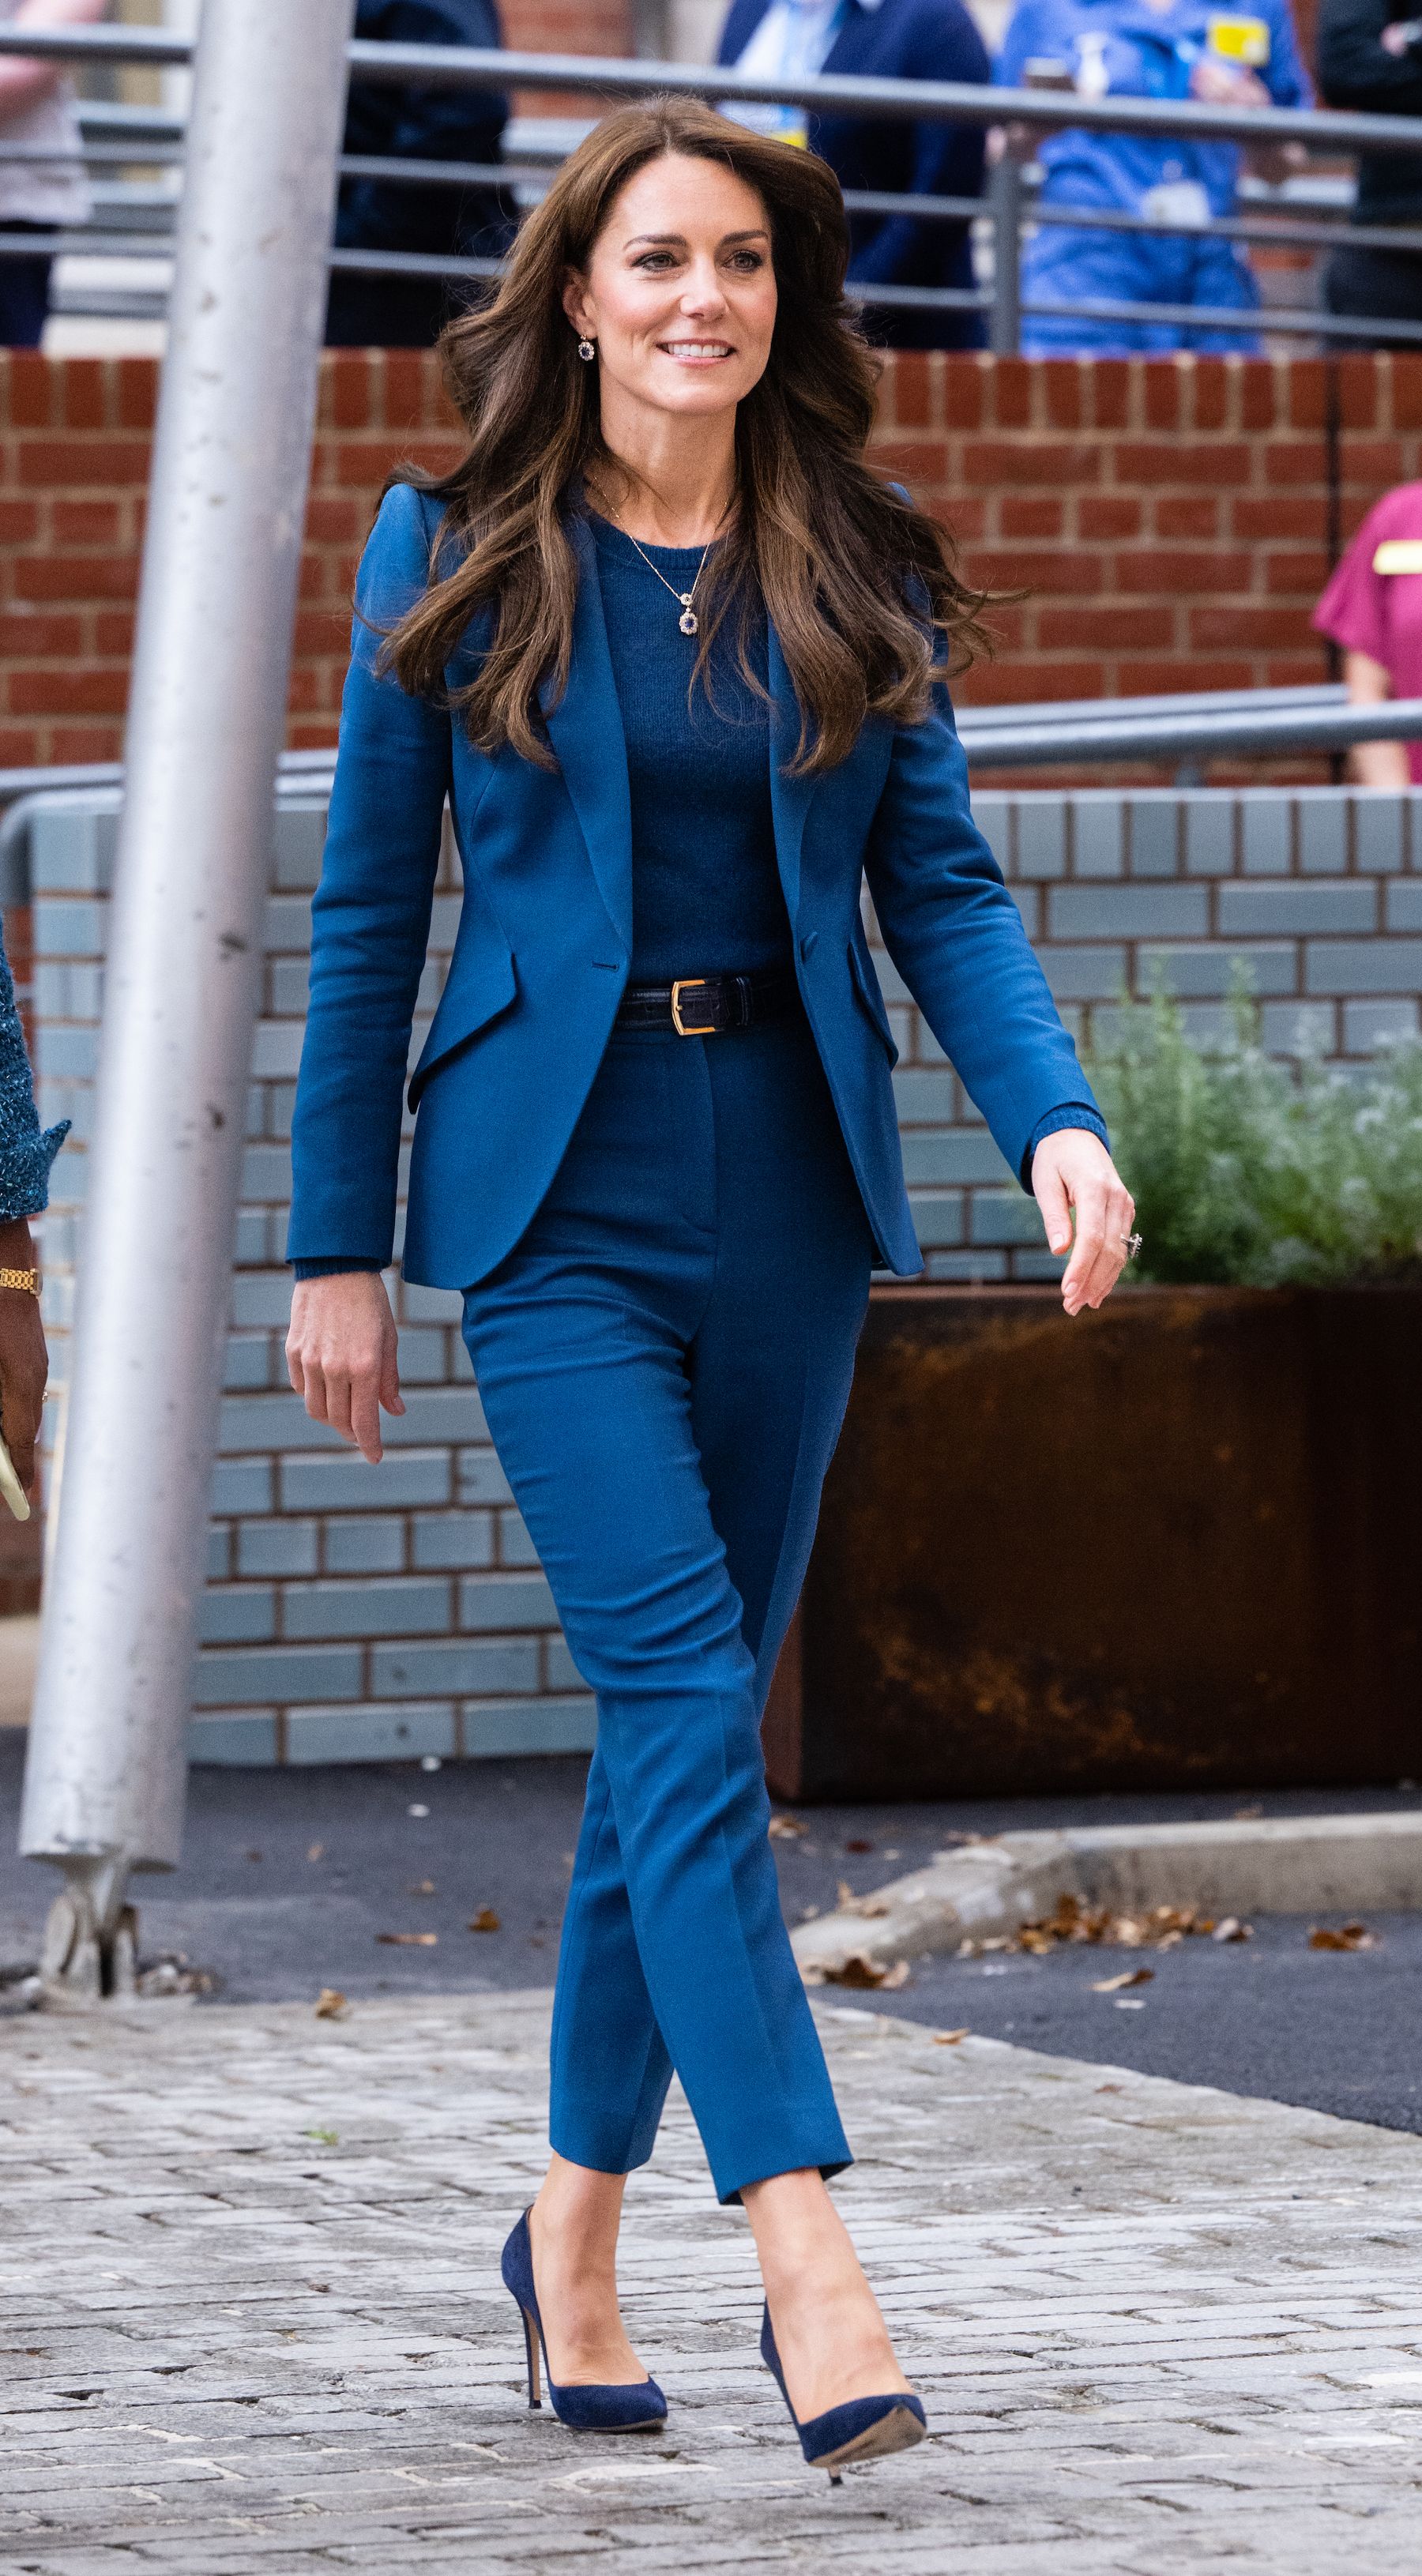 Kate Middleton Nails Her Work Uniform in a Blue Suit Tailored to Perfection